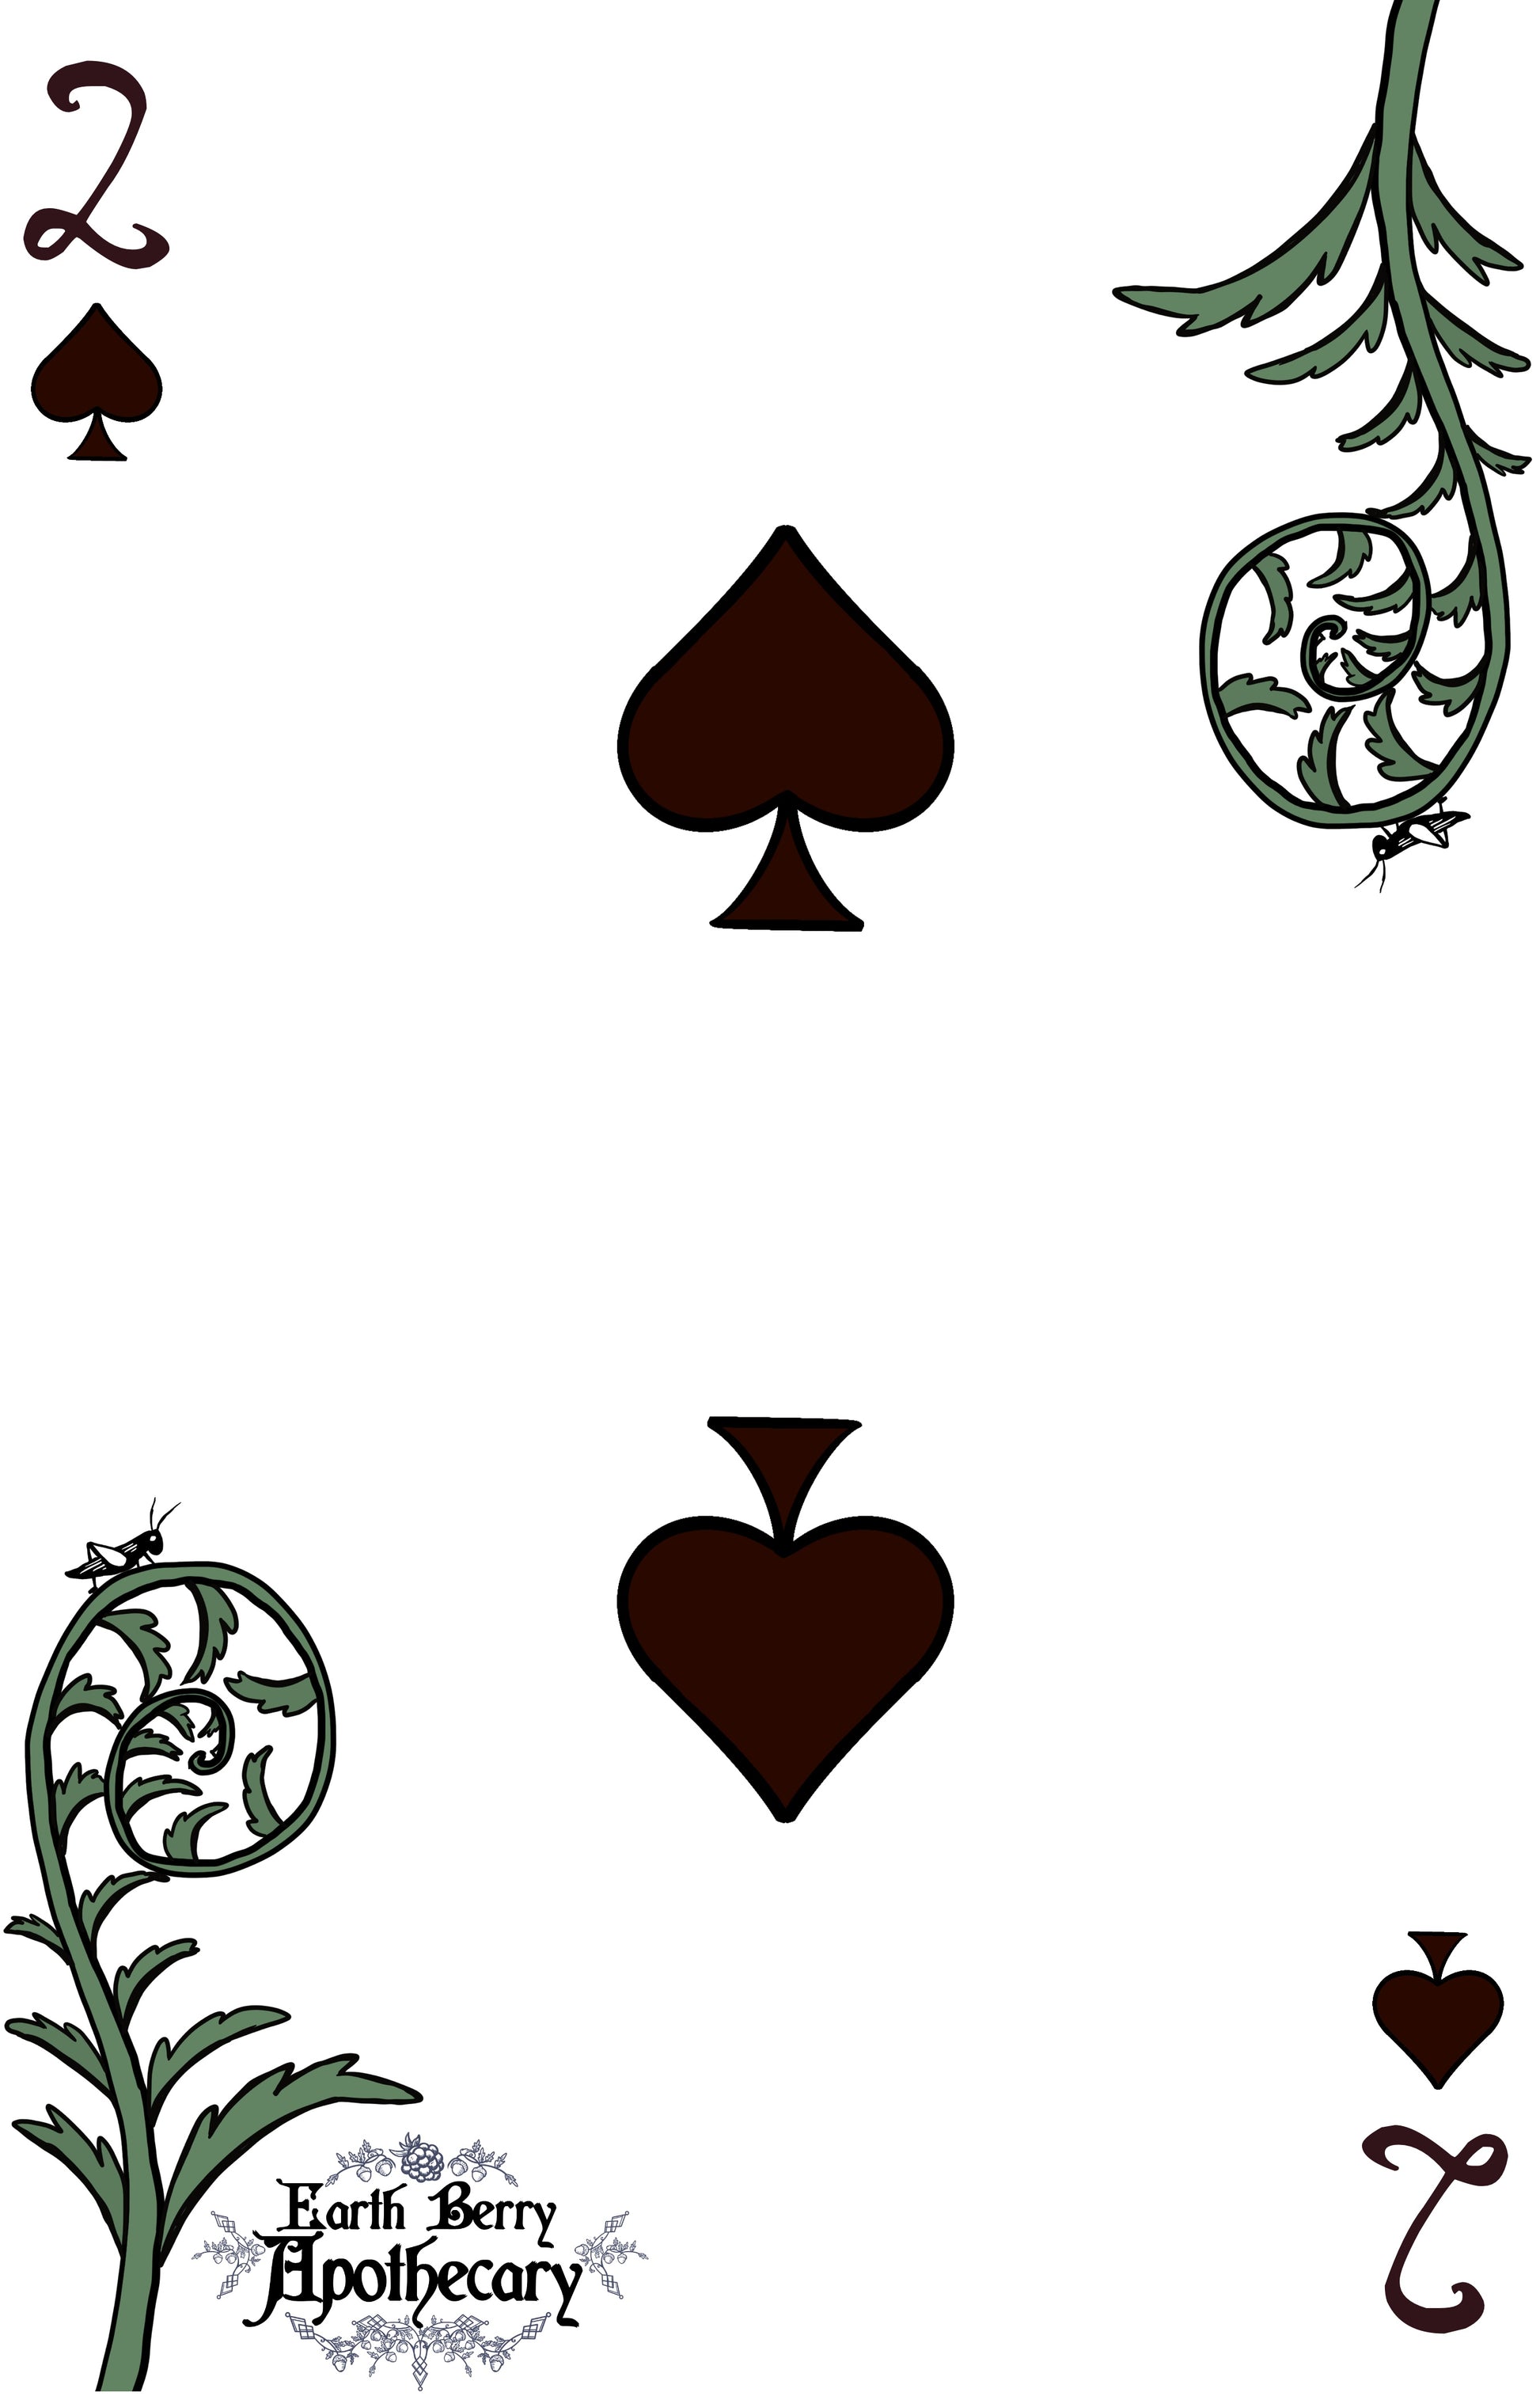 Nature and fantasy themed playing cards. The number cards have plants, feathers, and other magical nature items of curiosity.